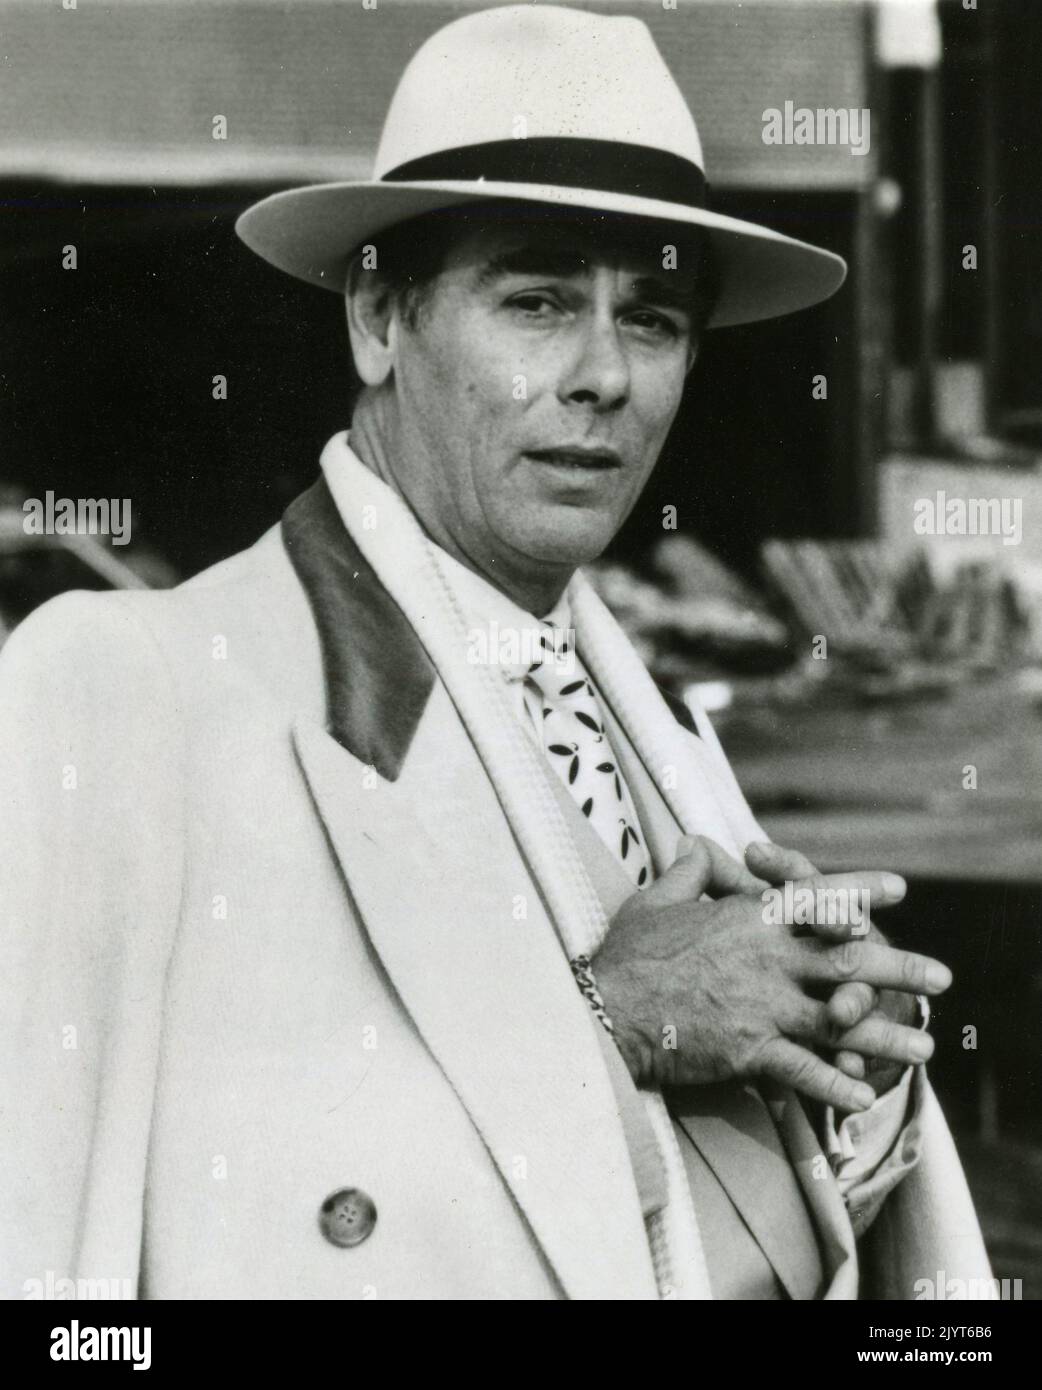 Schauspieler Dean Stockwell in dem Film Married to the Mob, USA 1988 Stockfoto